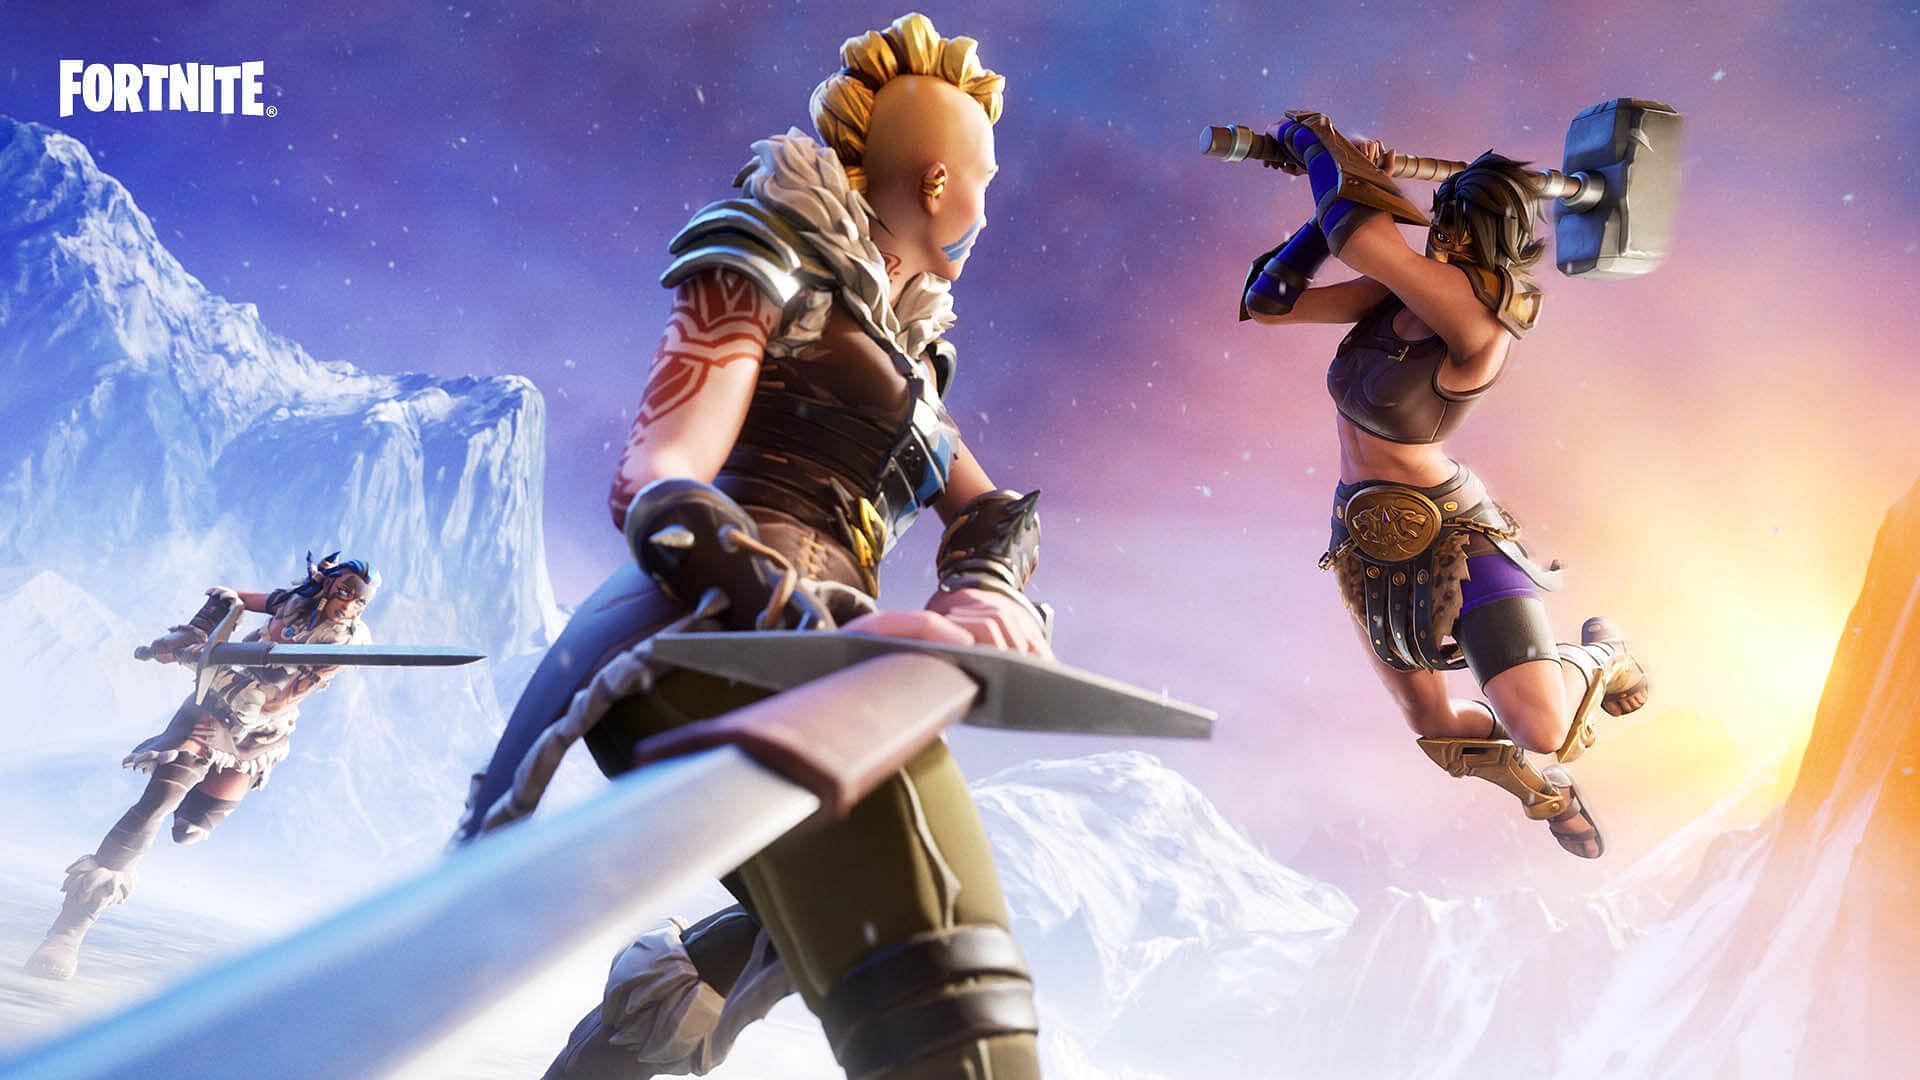 Fortnite Creative 2.0 will drastically change the popular video game (Image via Epic Games)